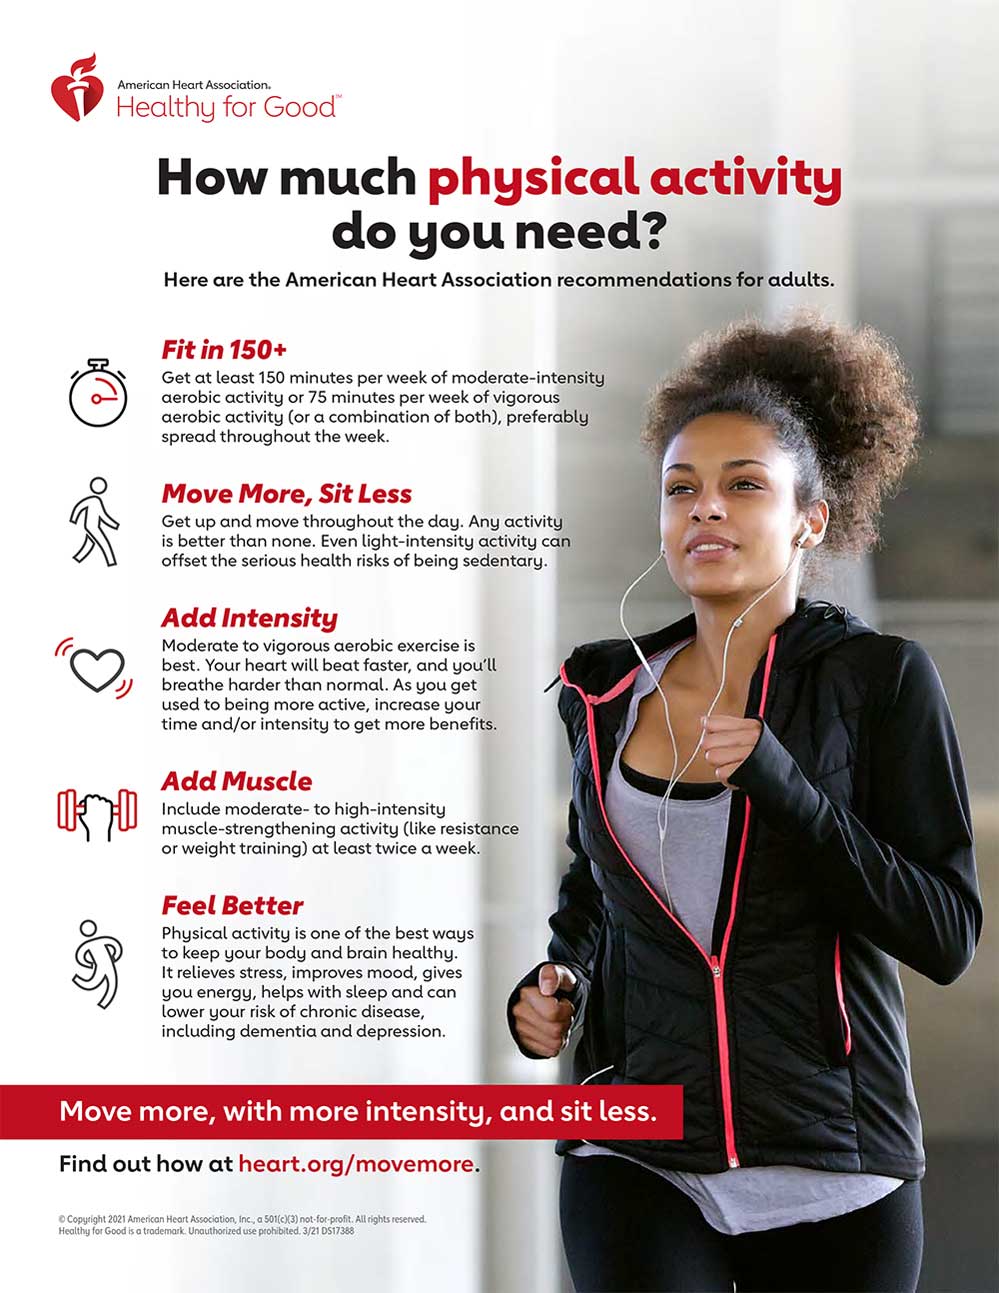 American Heart Association Recommendations for Physical Activity